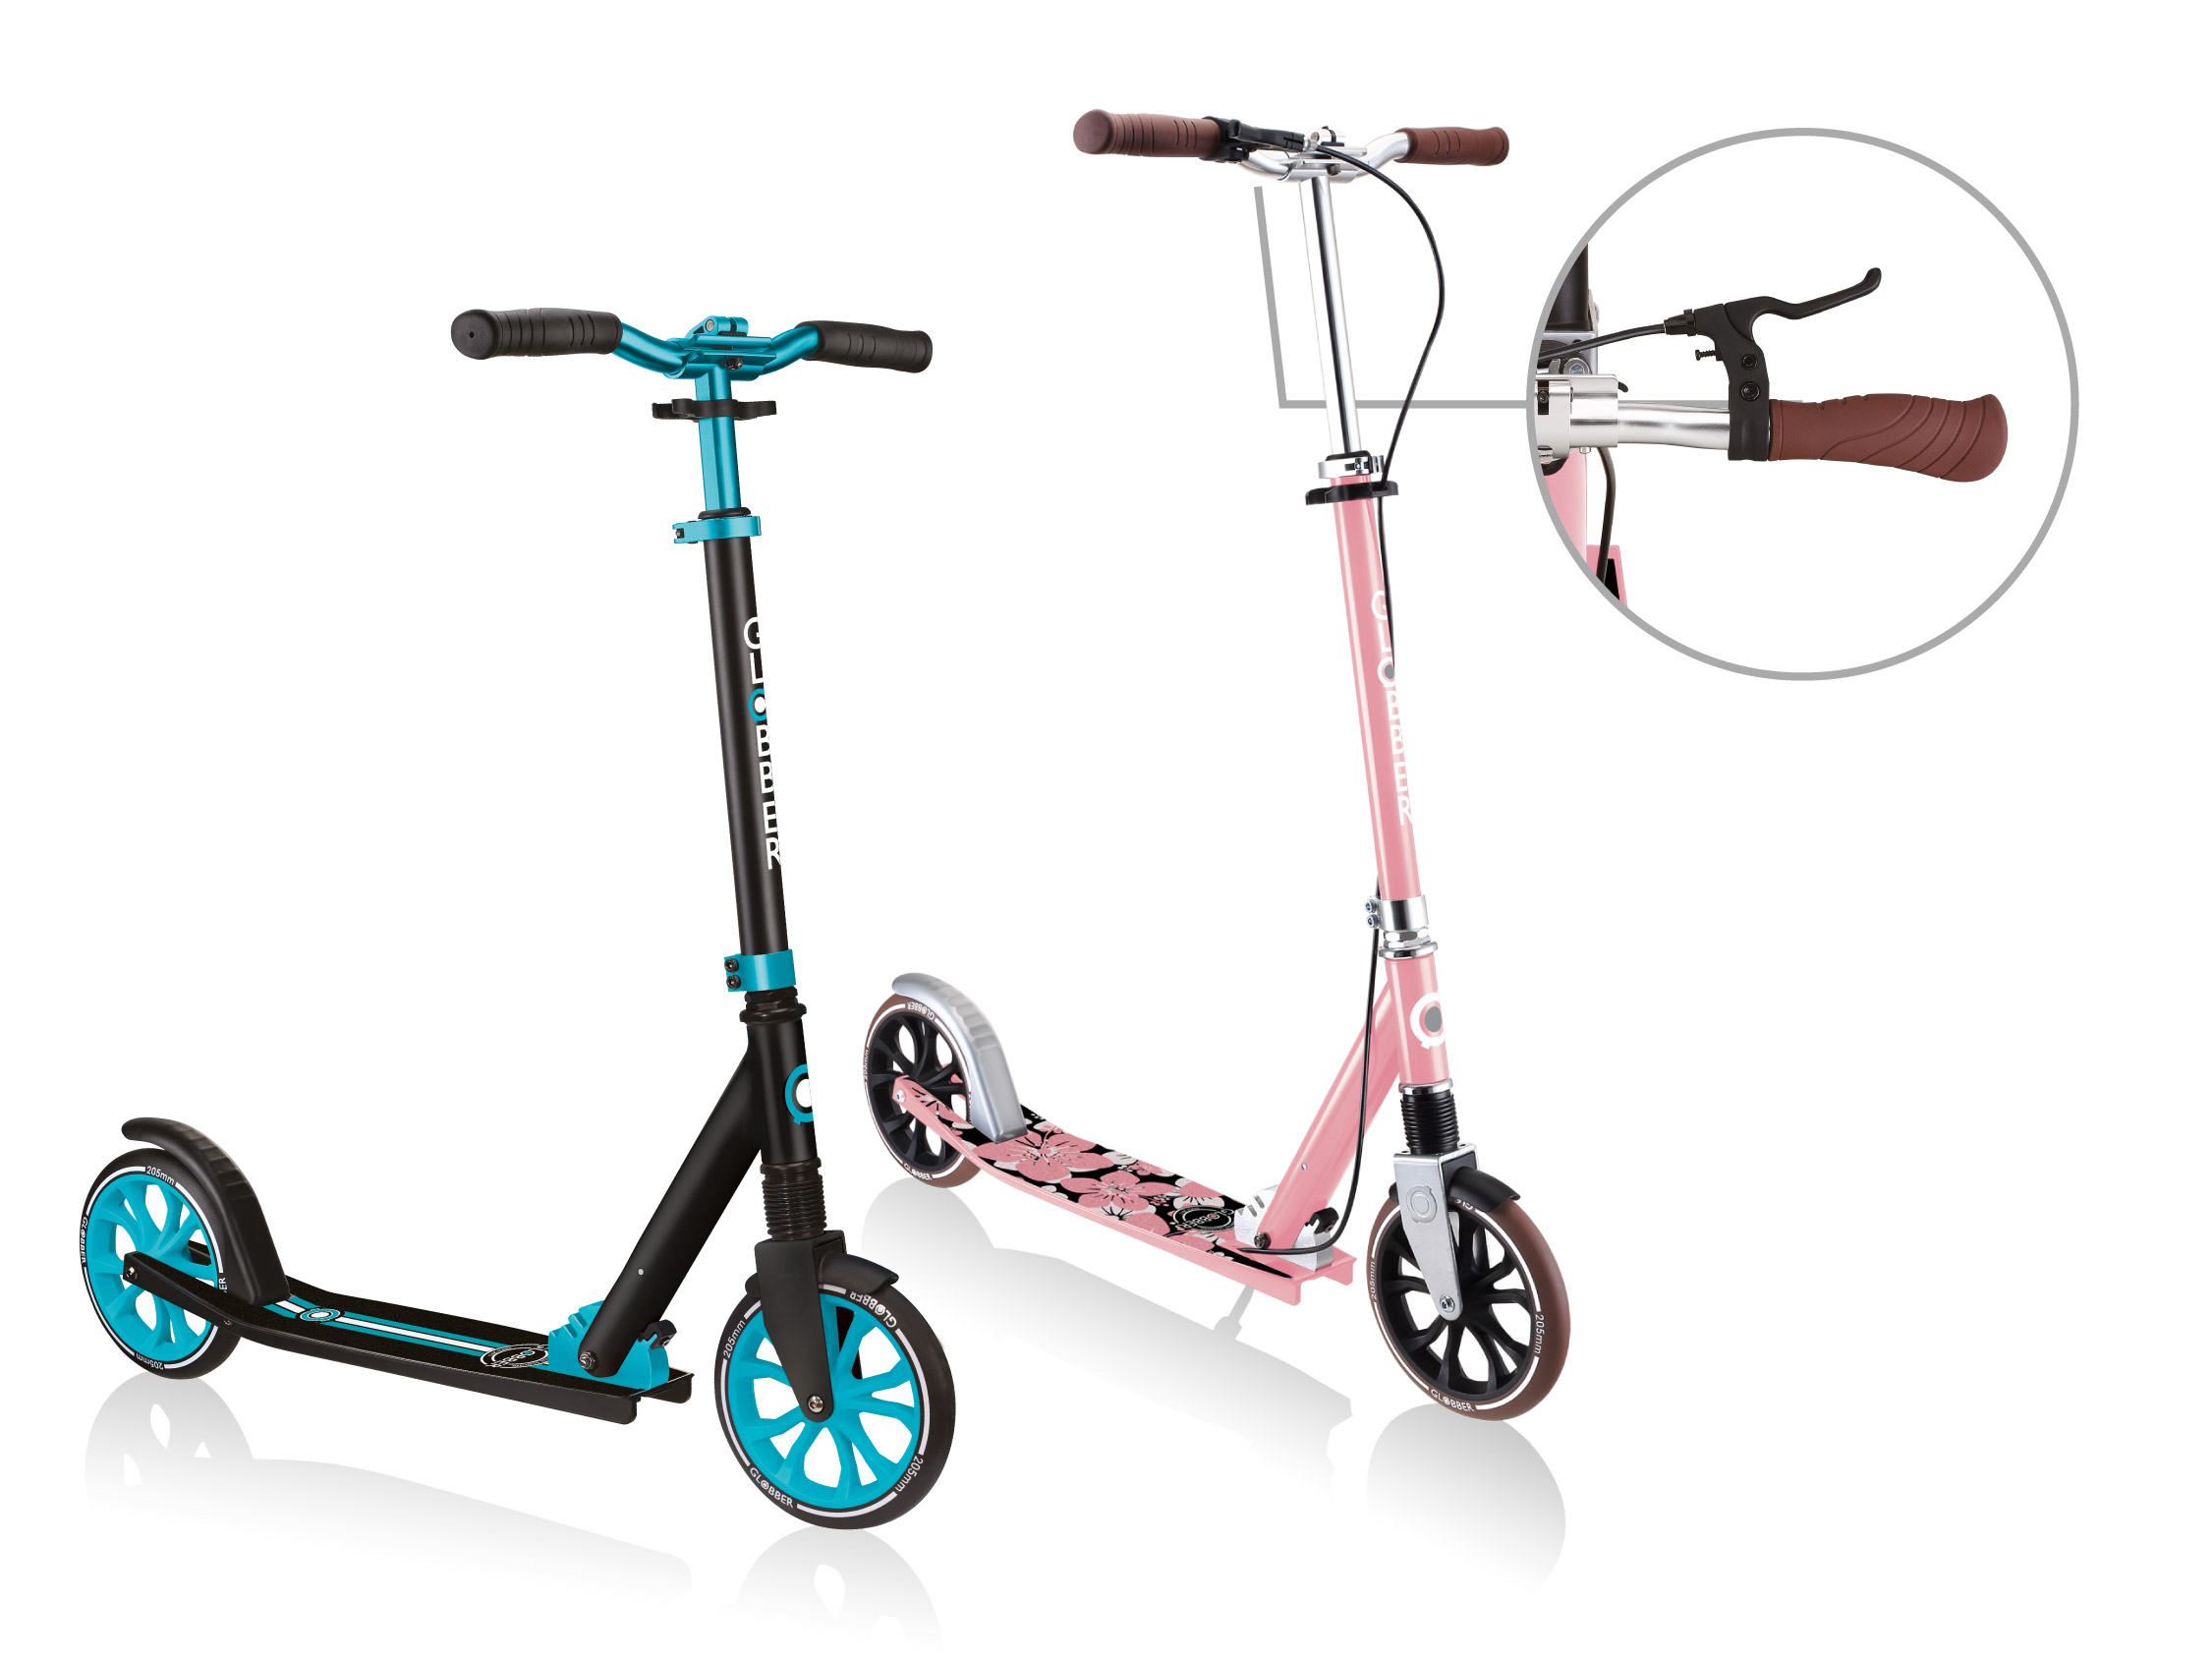 NL Series big wheel scooters for kids